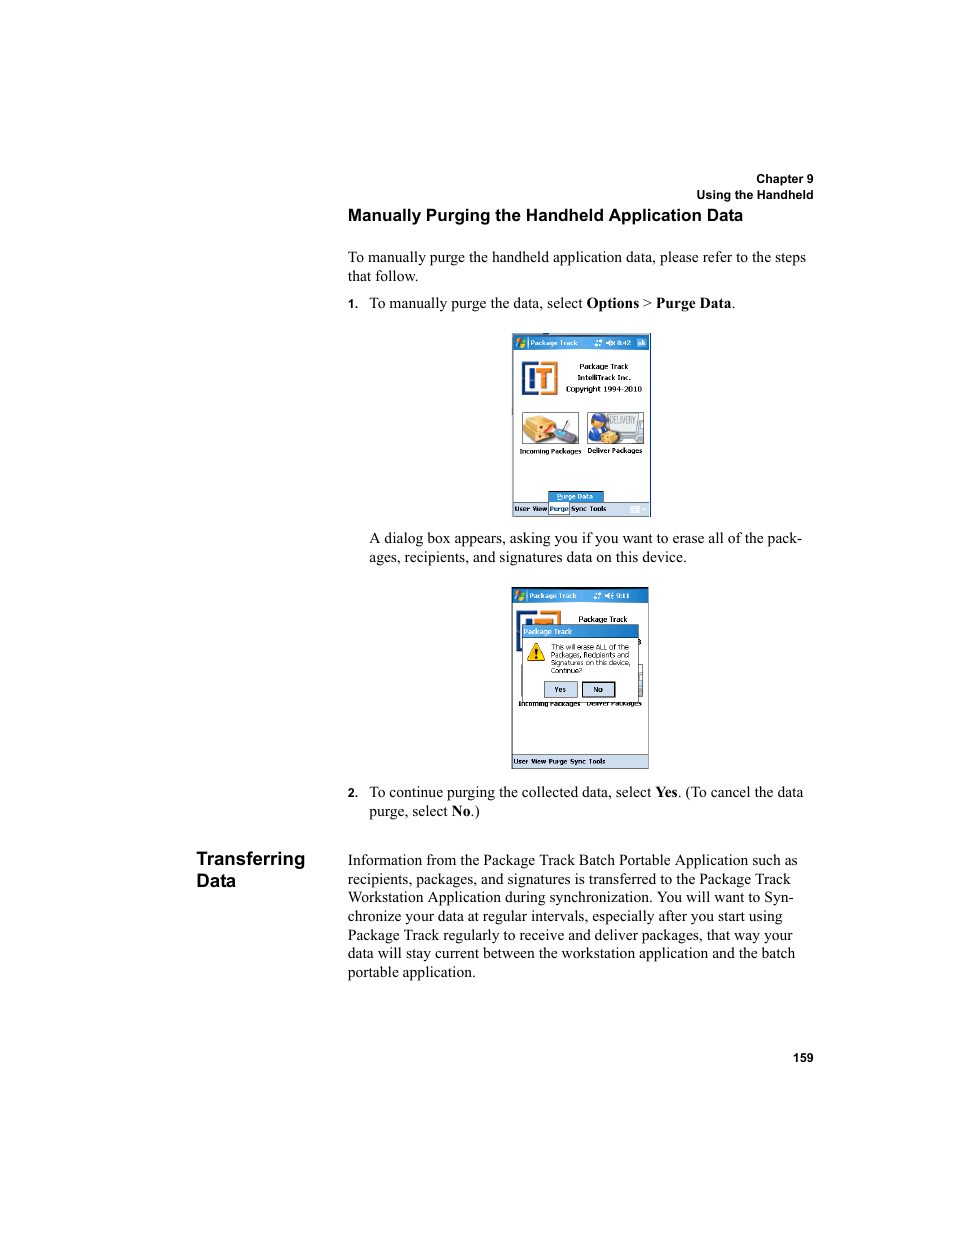 Transferring data, Manually purging the handheld application data | IntelliTrack Package Track User Manual | Page 173 / 296